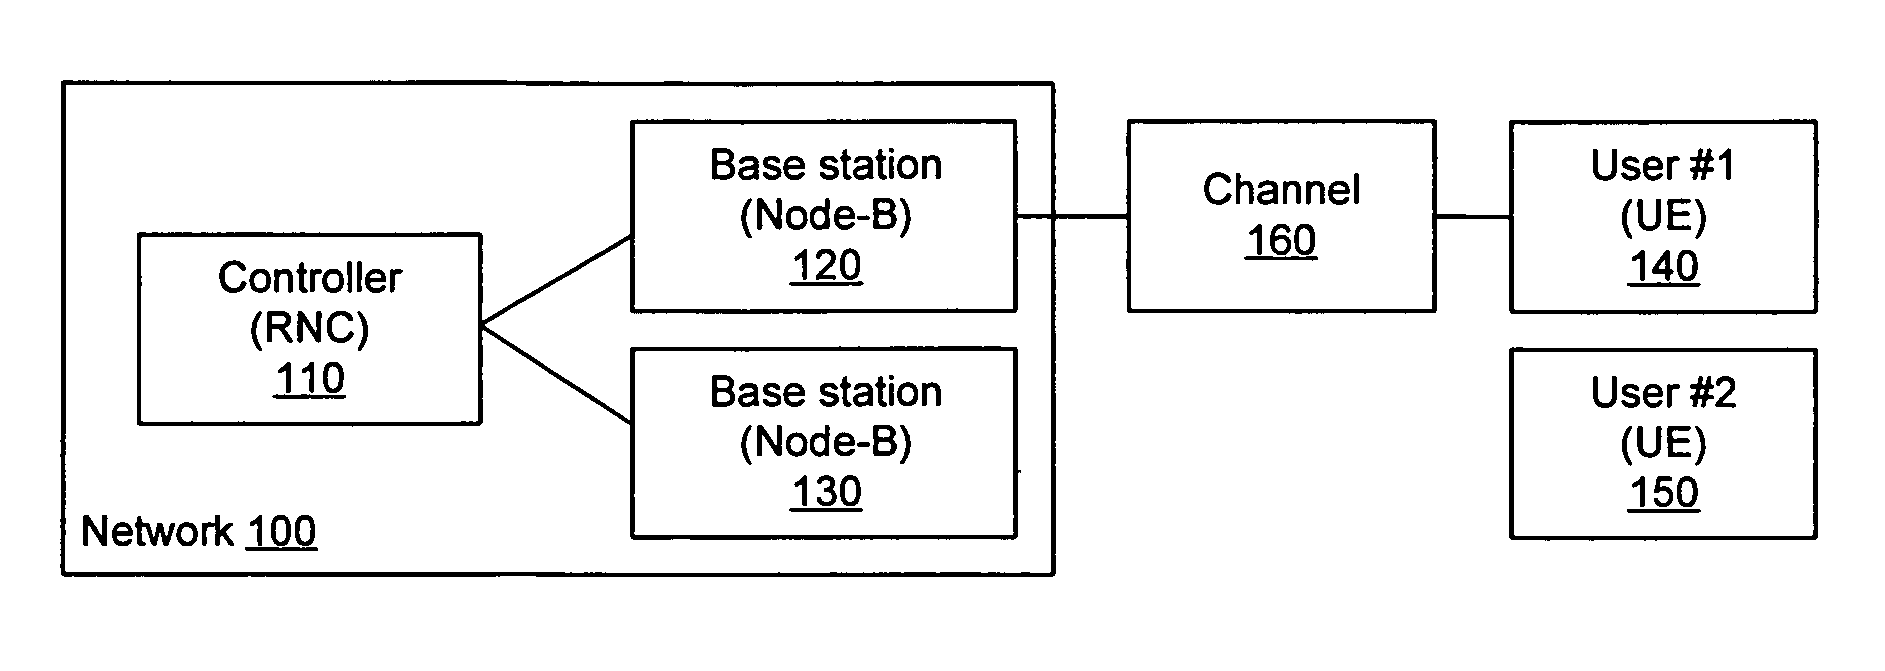 Power control in a wireless communication system